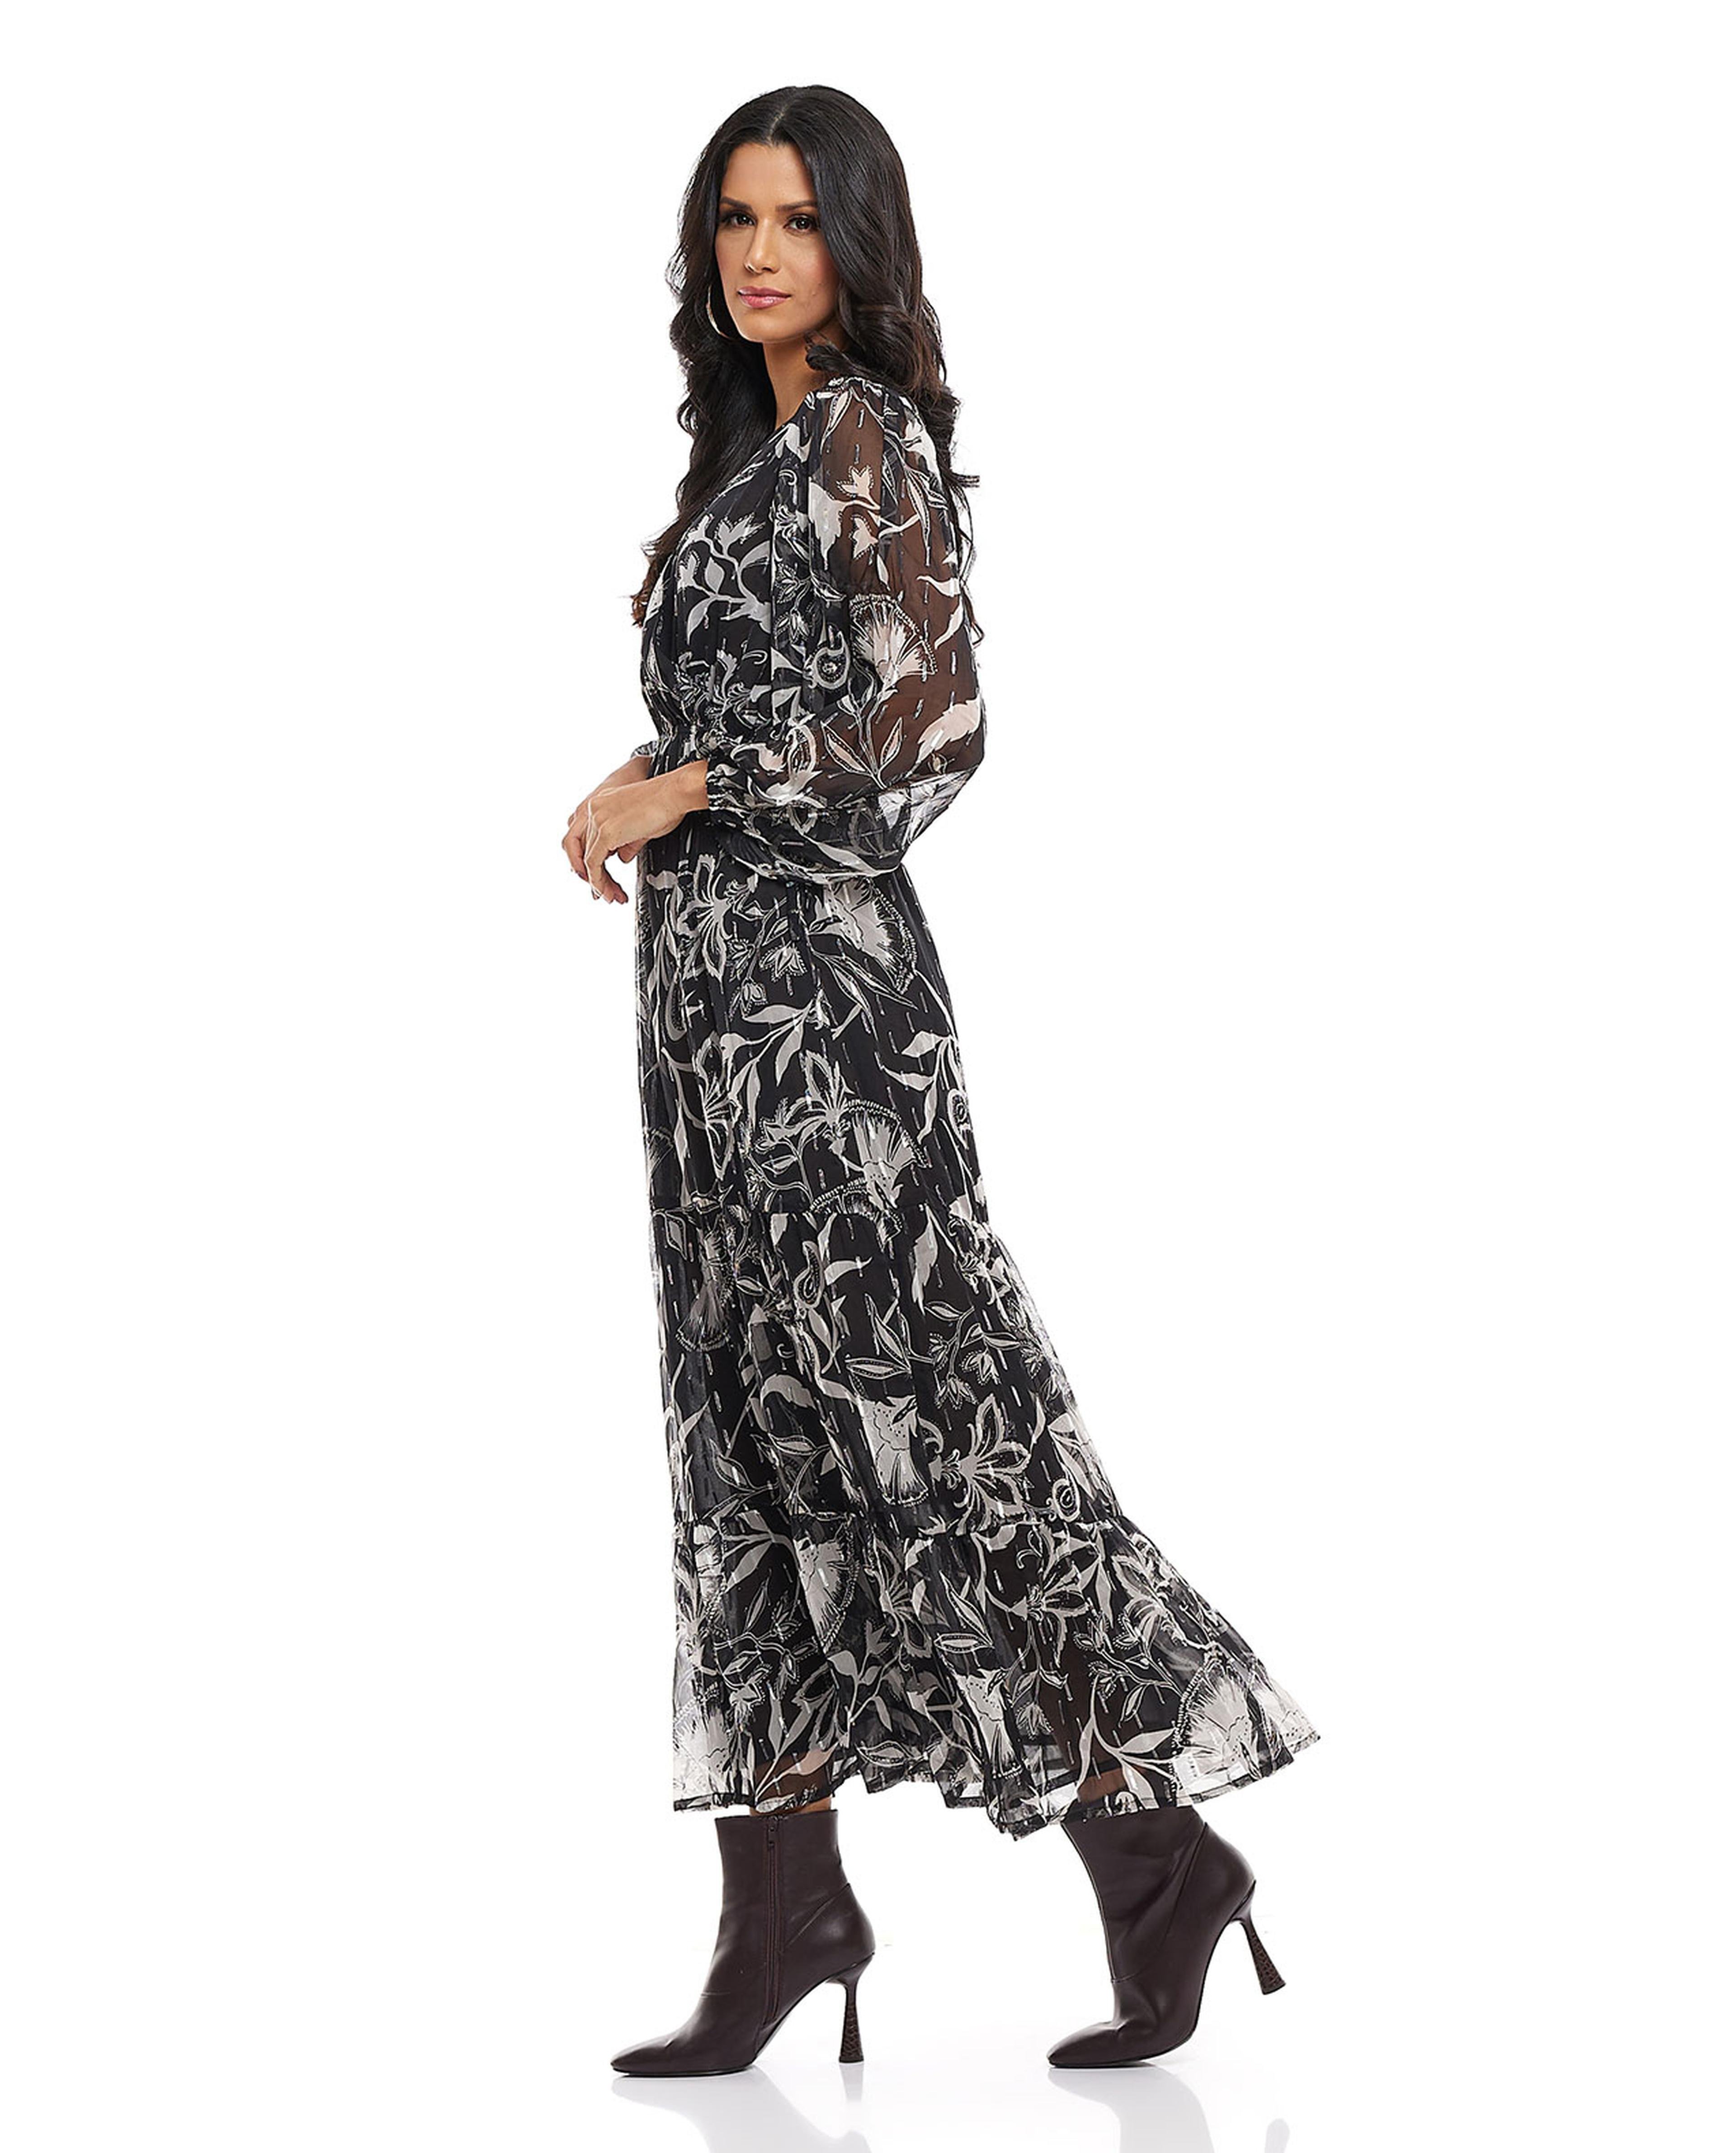 Patterned Tiered Dress with V-Neck and Balloon Sleeves